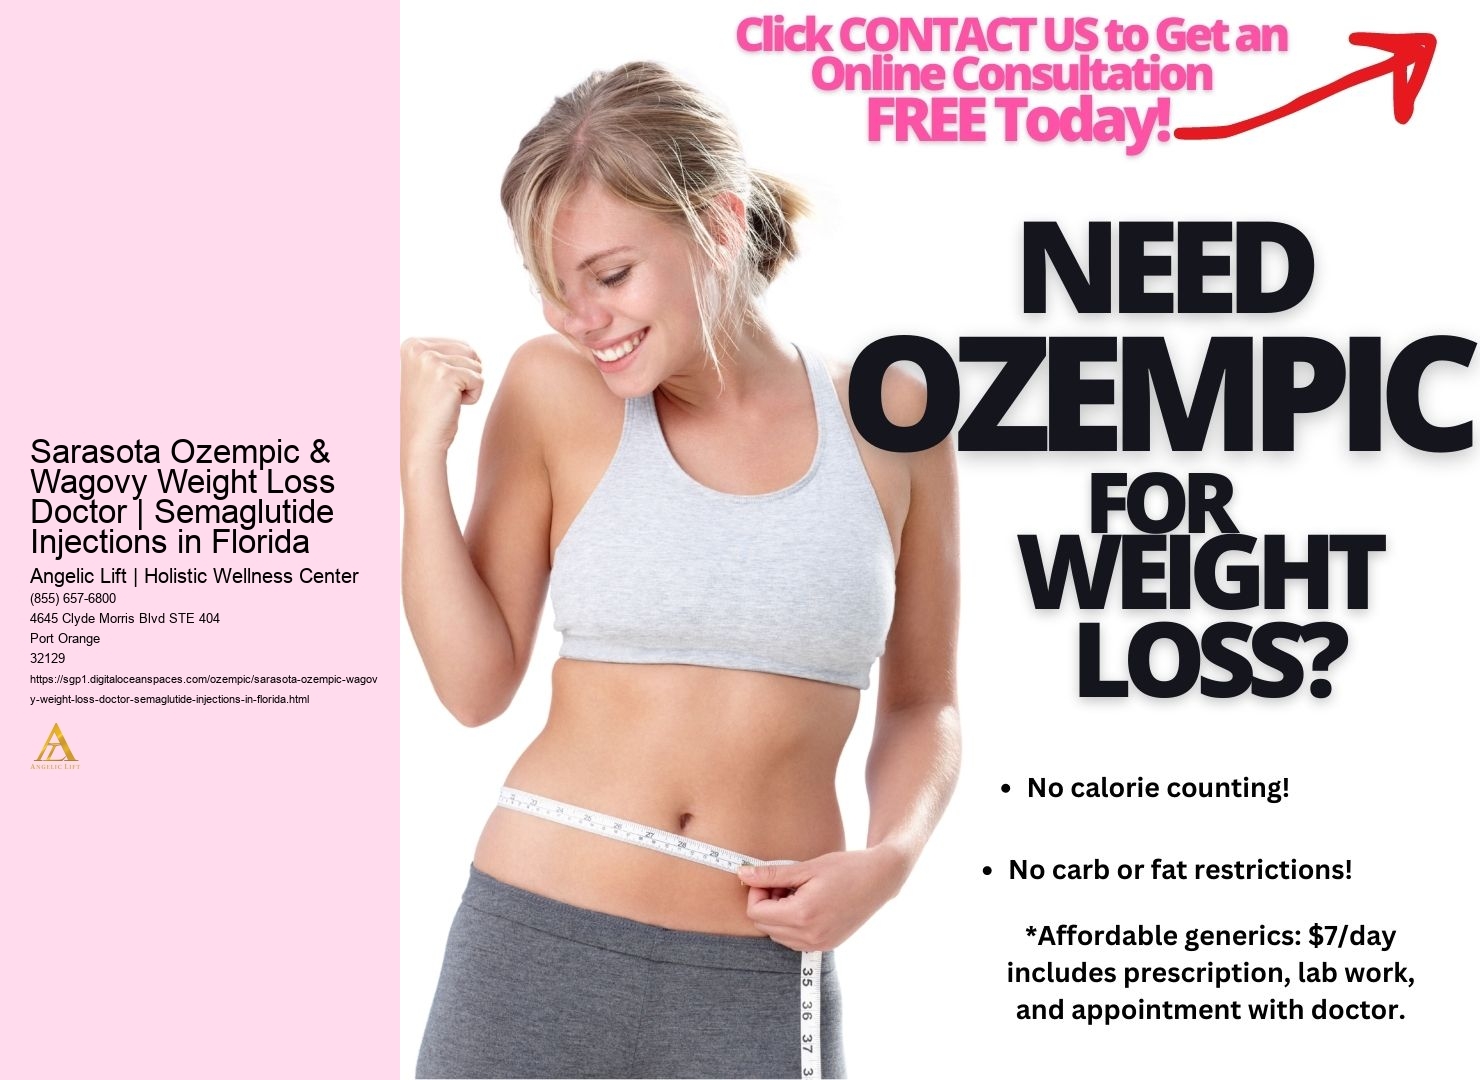 Sarasota Ozempic & Wagovy Weight Loss Doctor | Semaglutide Injections in Florida